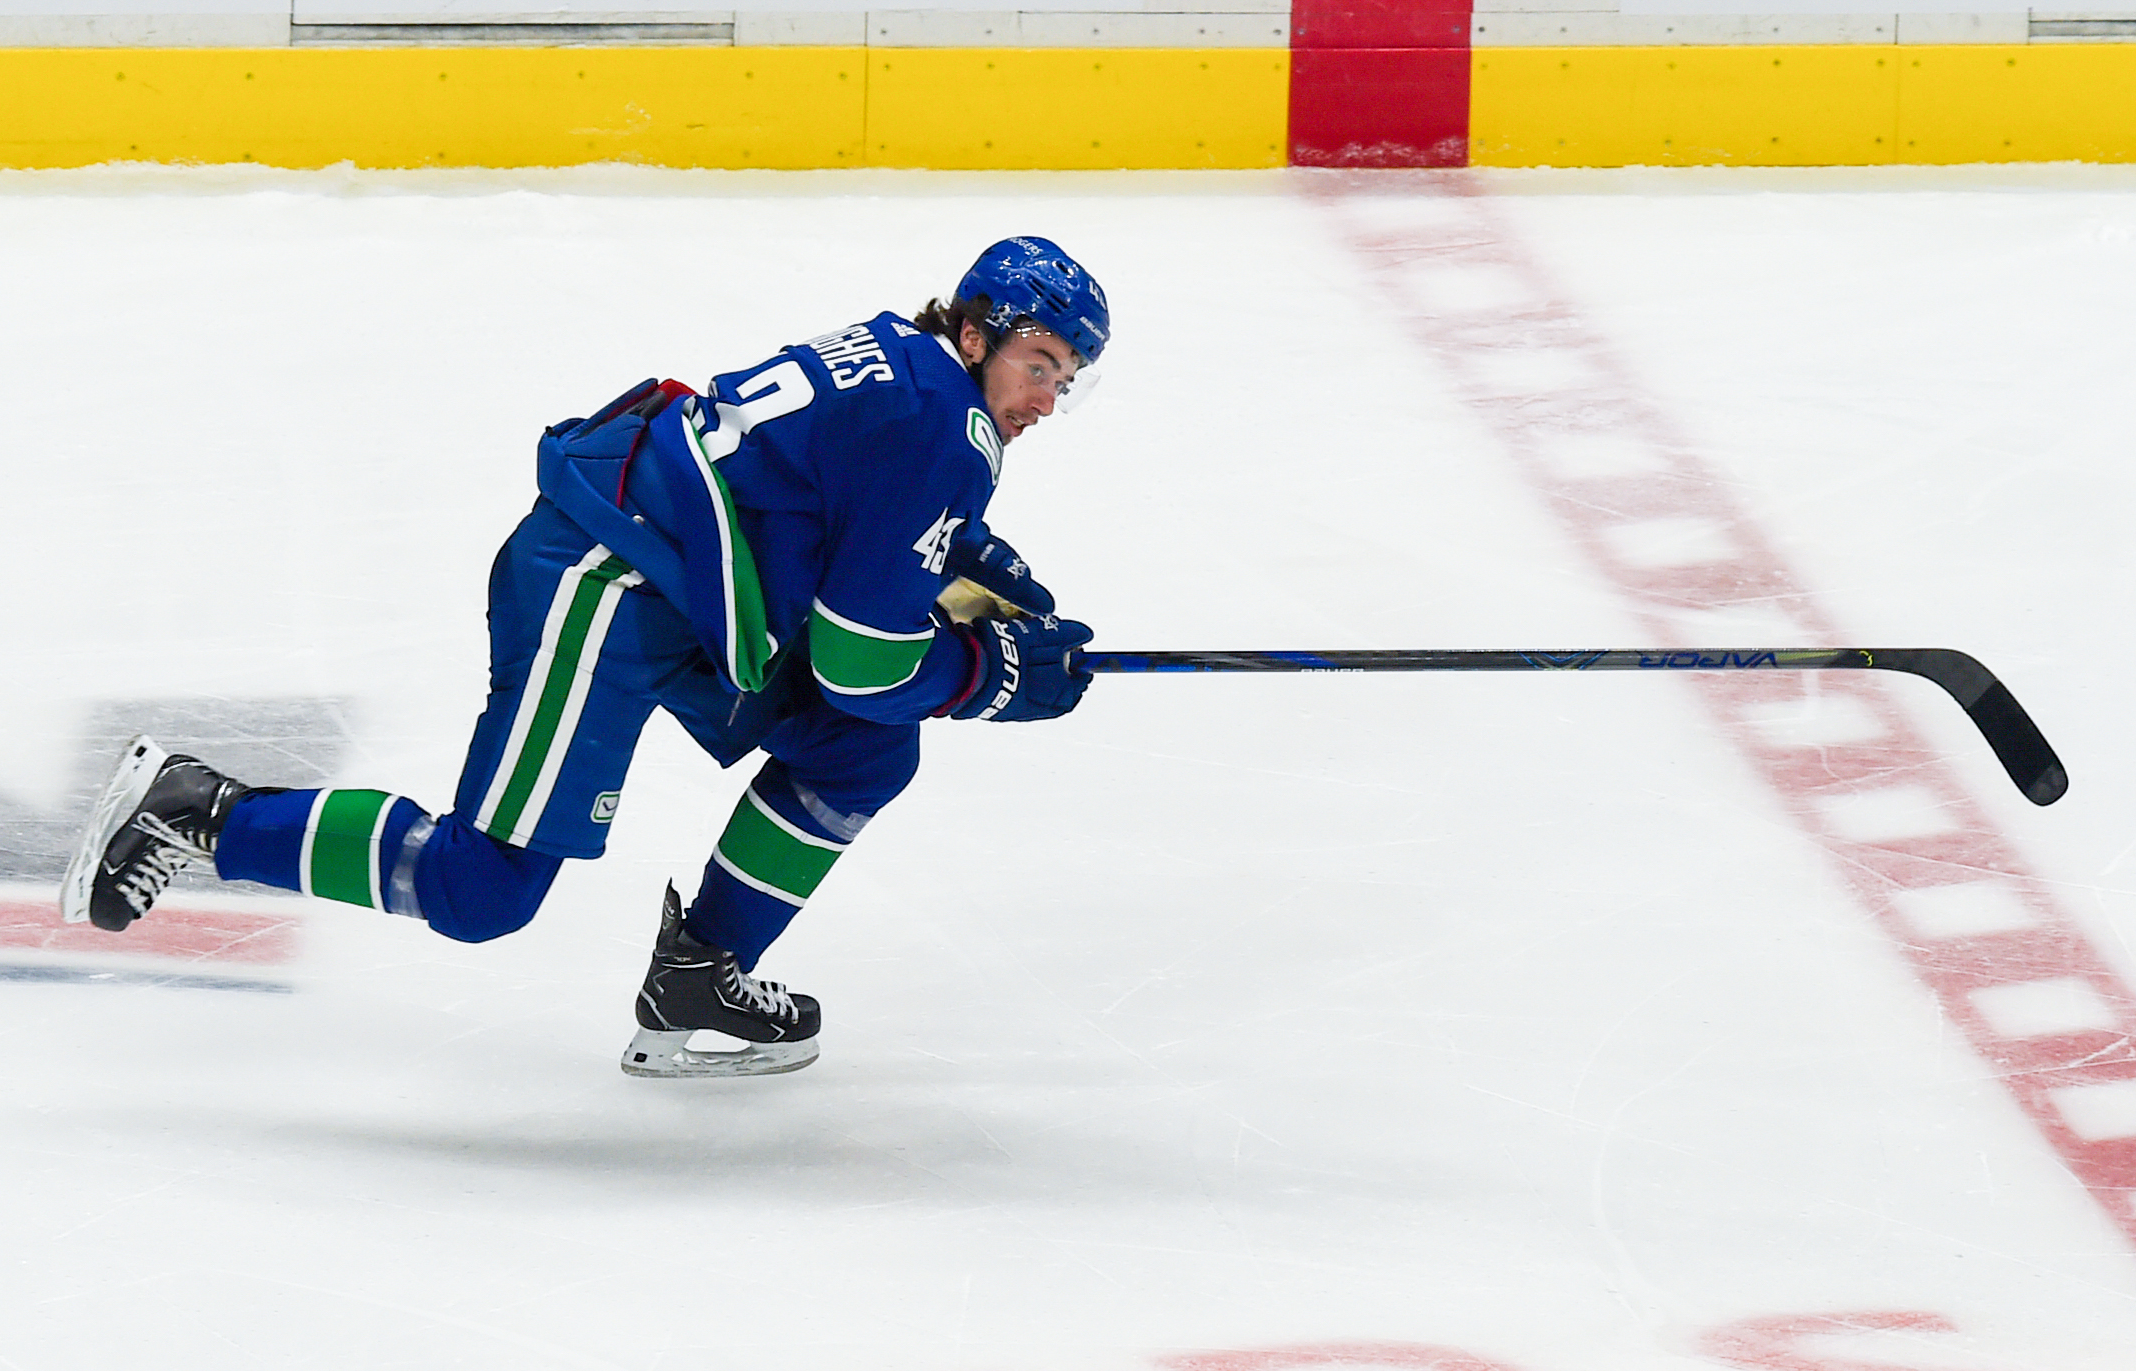 Canucks: Quinn Hughes needs to improve his struggling defensive game